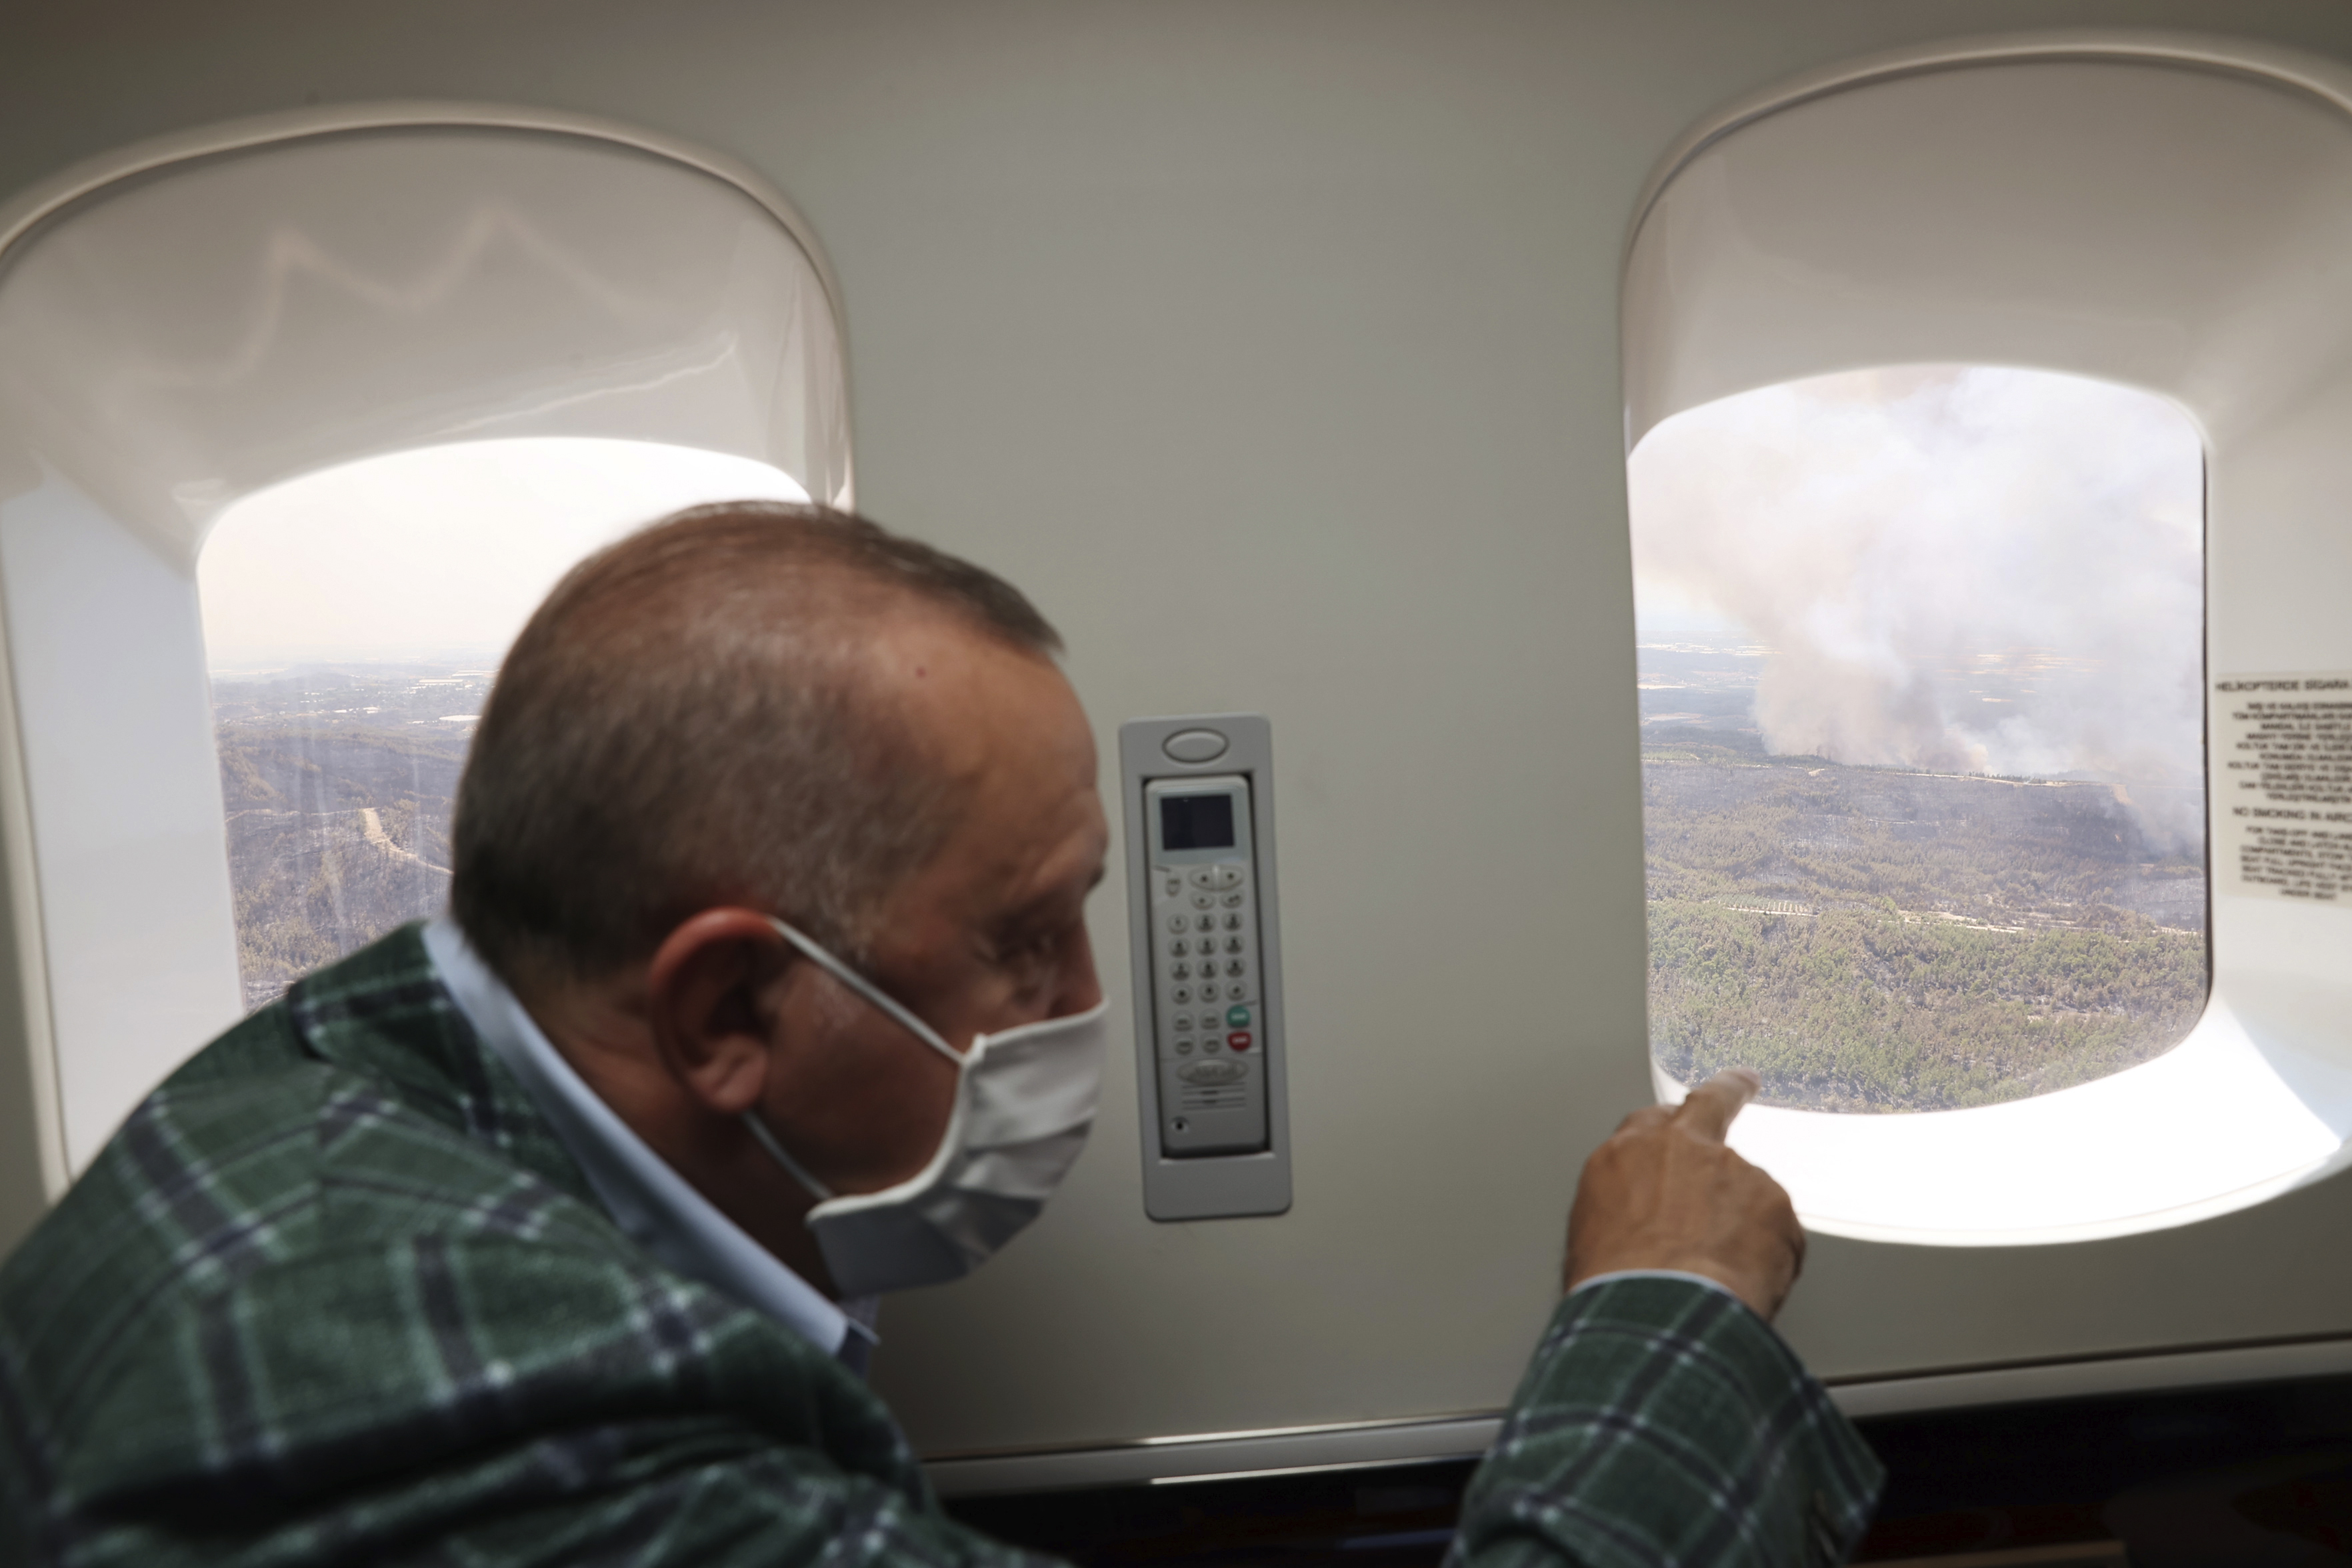 Recep Tayyip Erdogan watches the wildfires from his plane